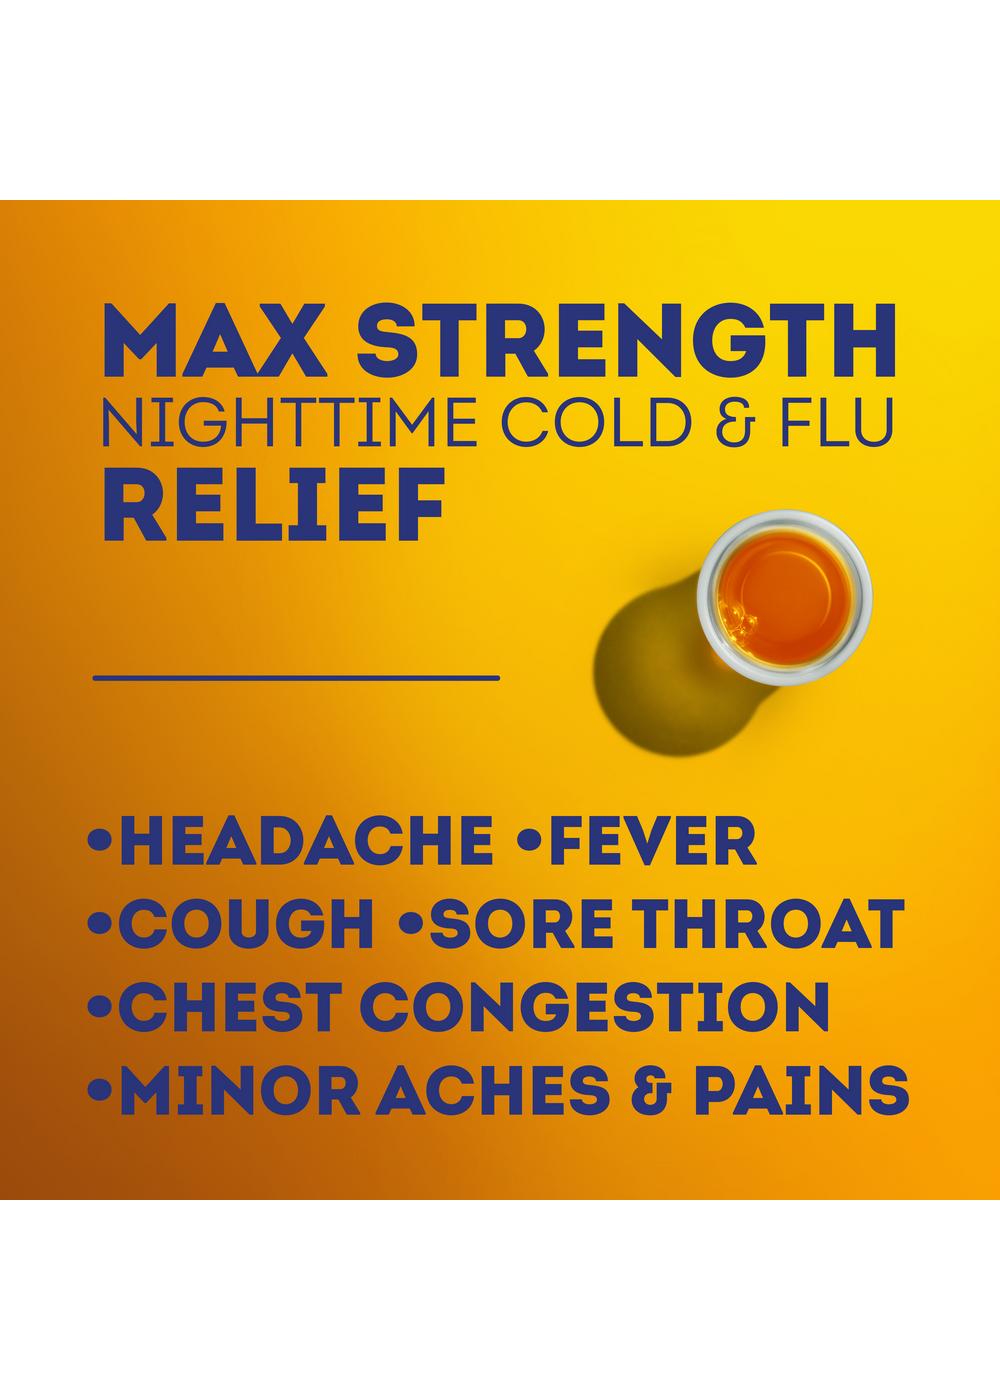 Vicks NyQuil SEVERE Cold & Flu Liquid - Honey; image 11 of 11